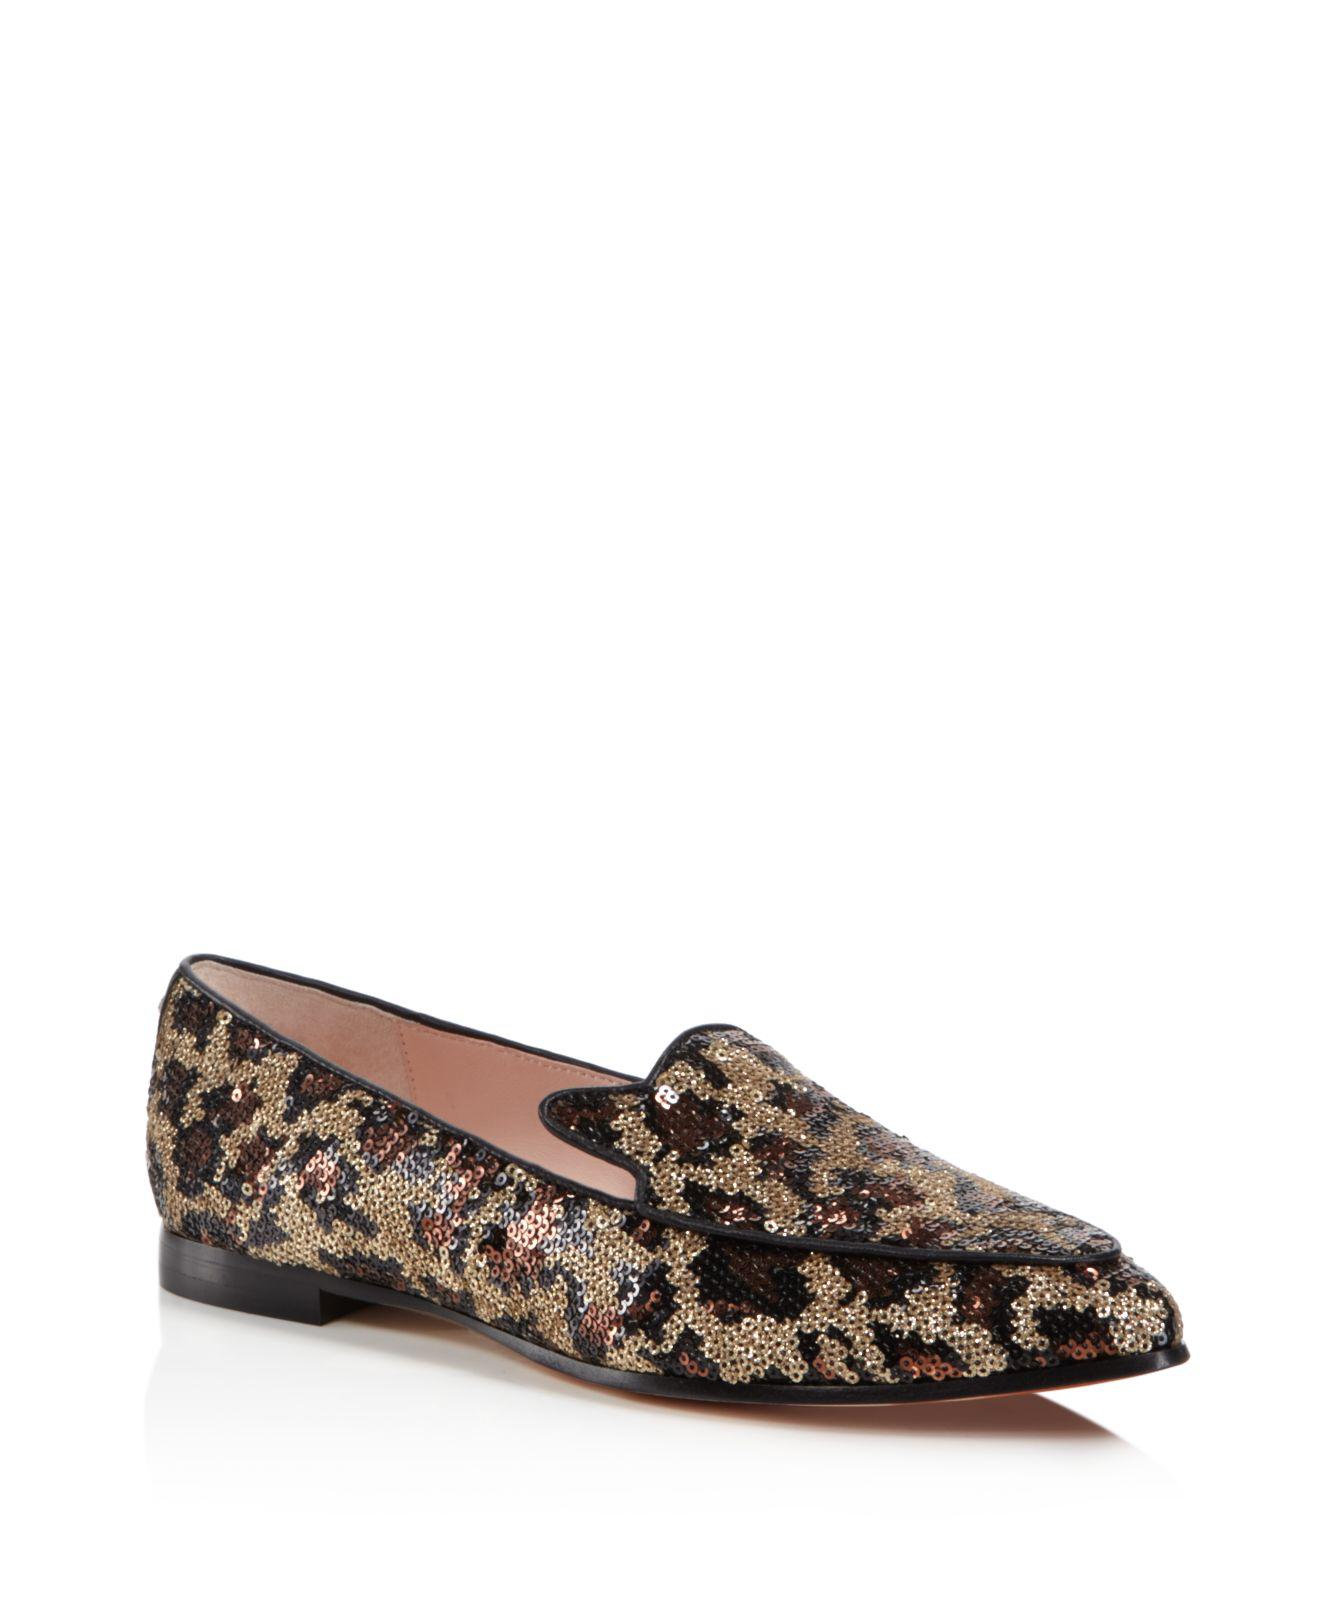 Kate Spade Caty Sequin Leopard Print Loafers | Lyst